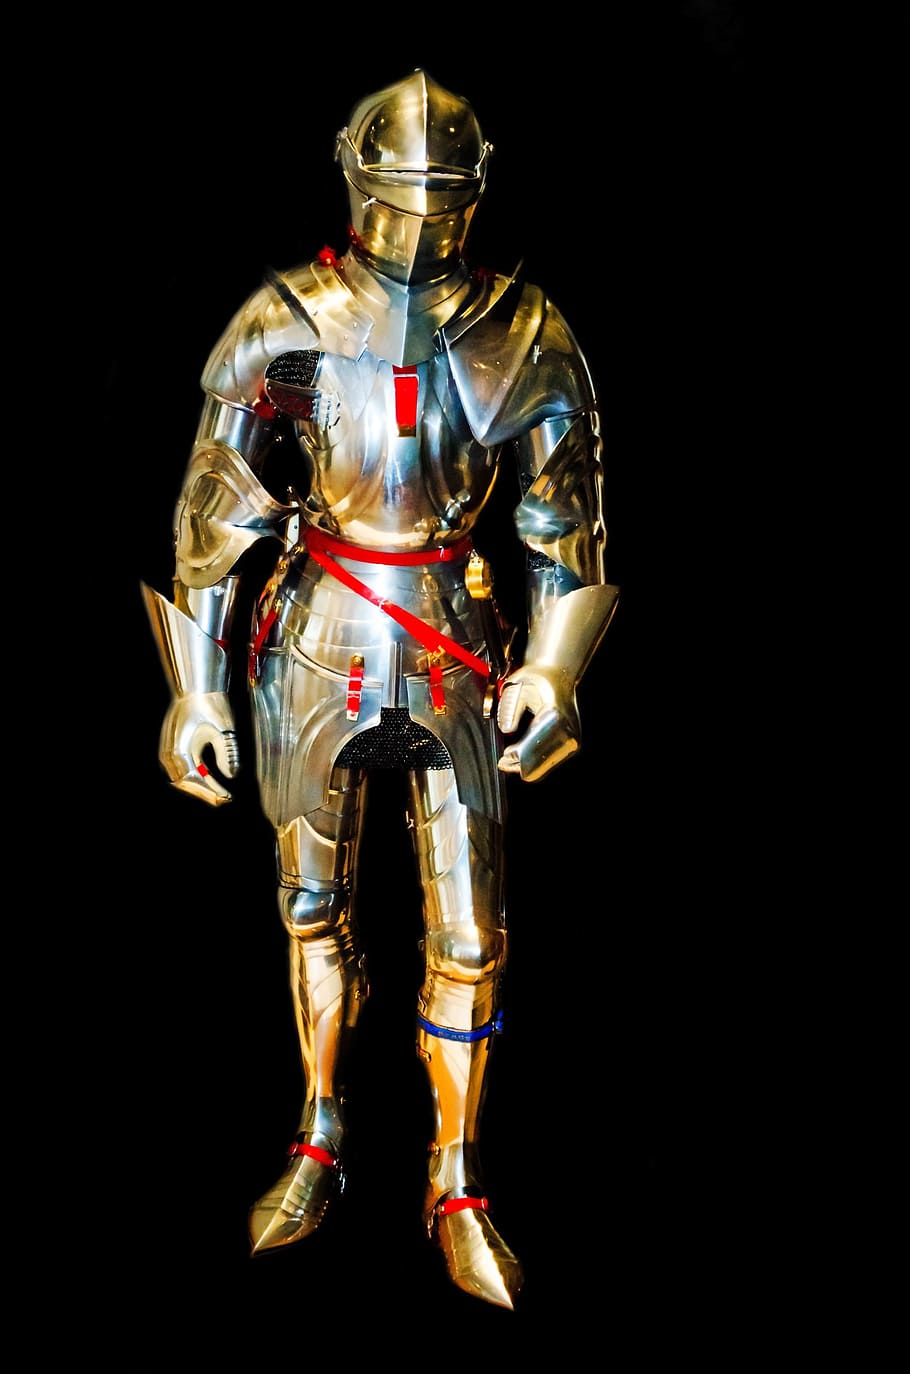 gold gladiator armor, knight, armored, protection, steel, history